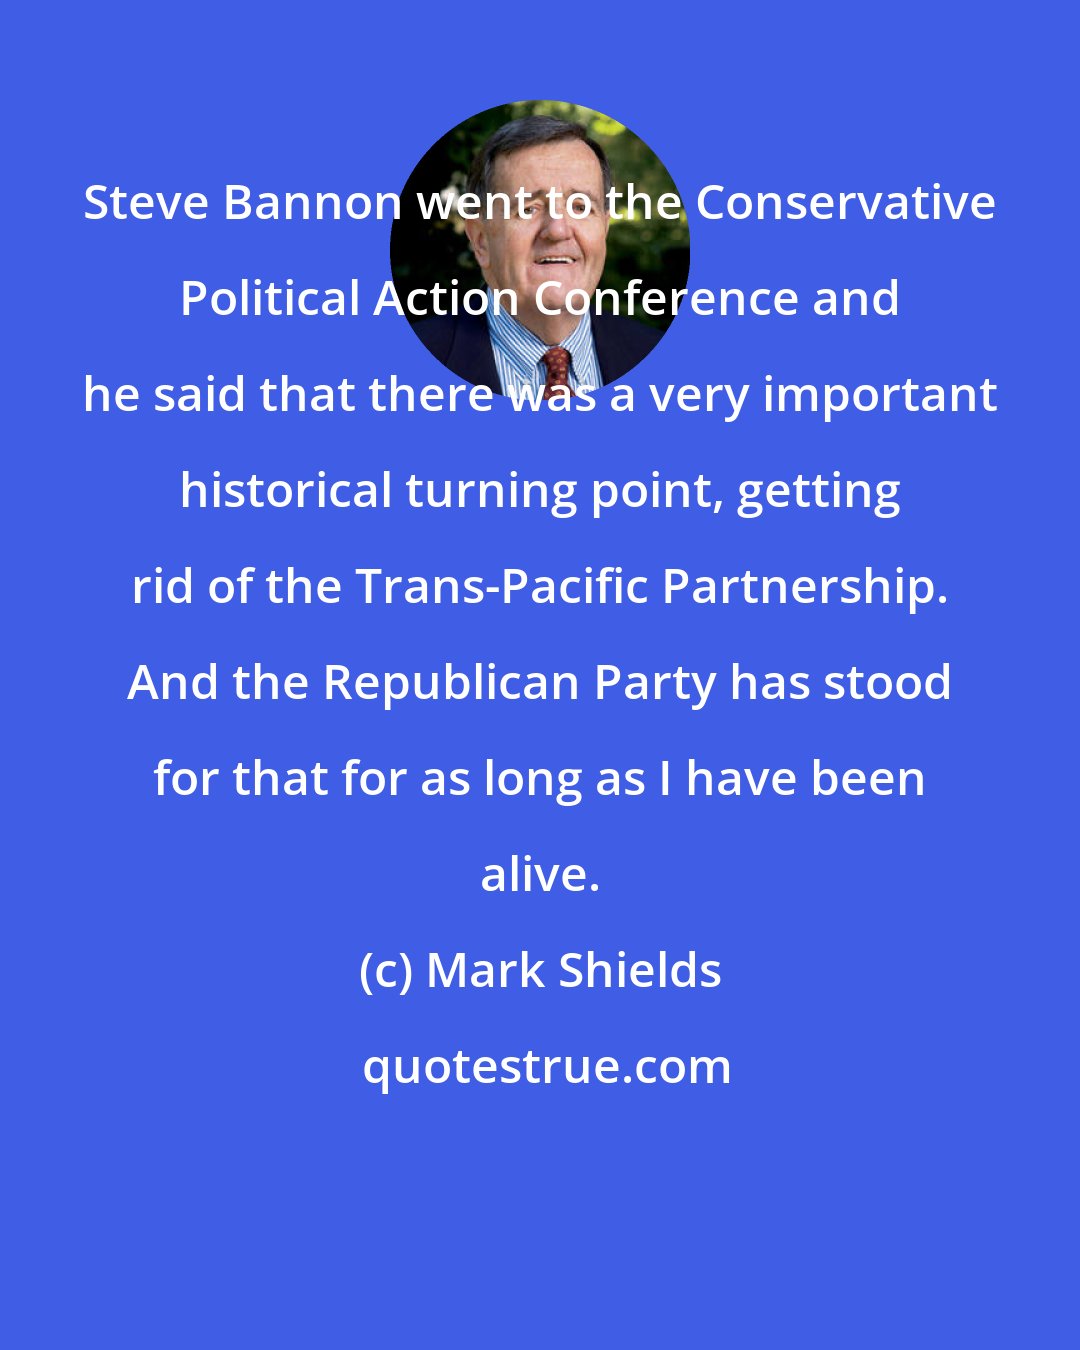 Mark Shields: Steve Bannon went to the Conservative Political Action Conference and he said that there was a very important historical turning point, getting rid of the Trans-Pacific Partnership. And the Republican Party has stood for that for as long as I have been alive.